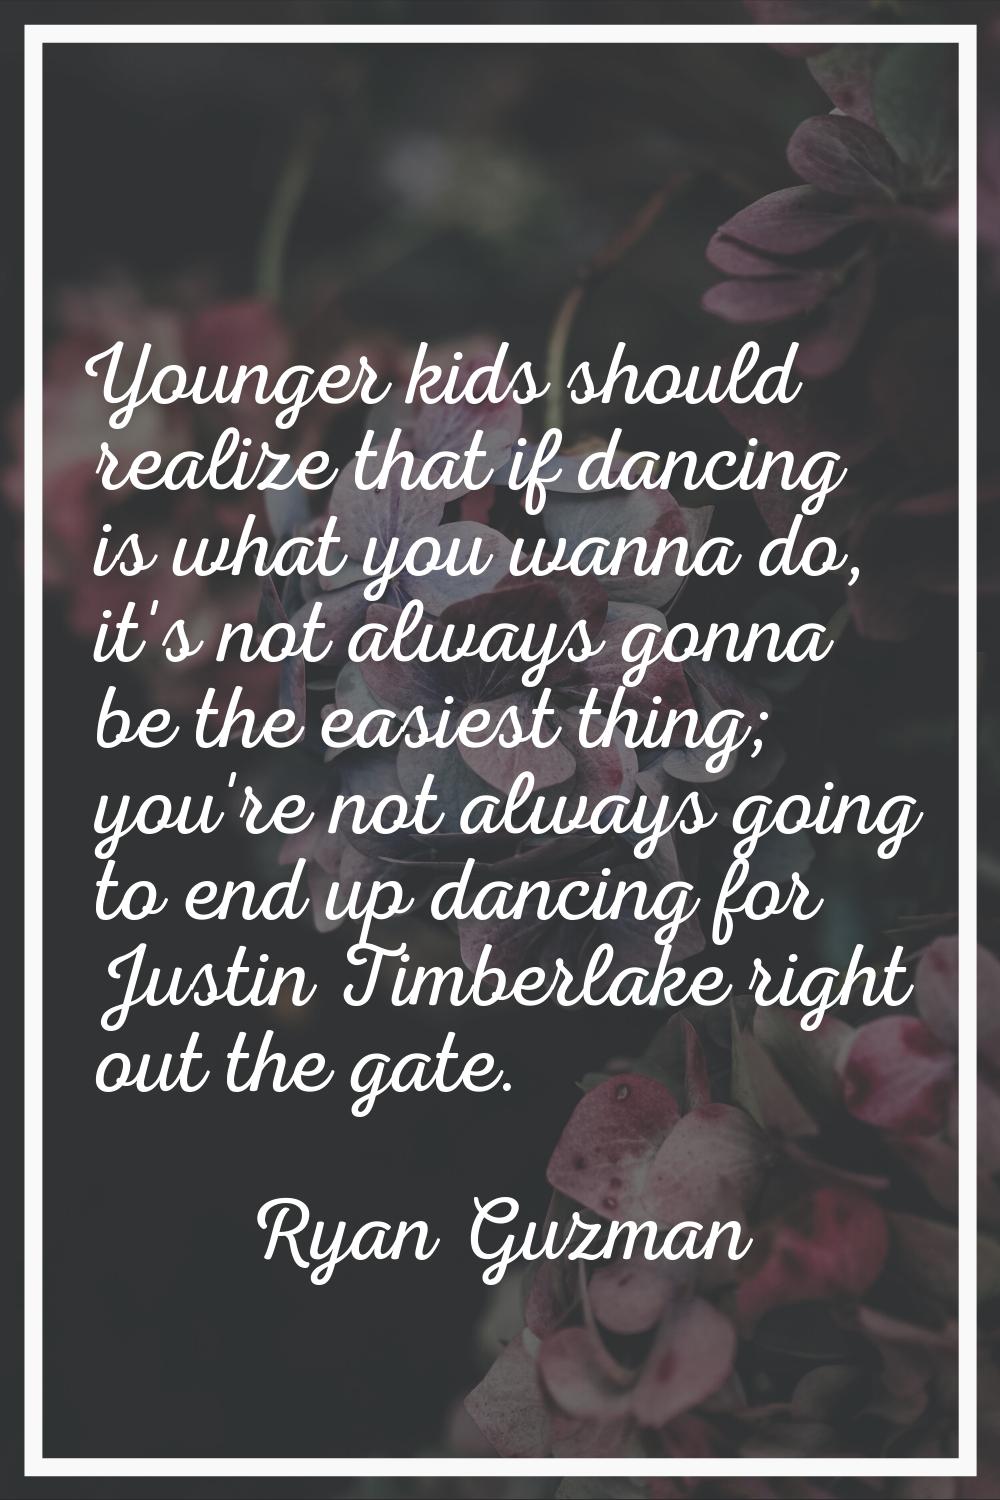 Younger kids should realize that if dancing is what you wanna do, it's not always gonna be the easi